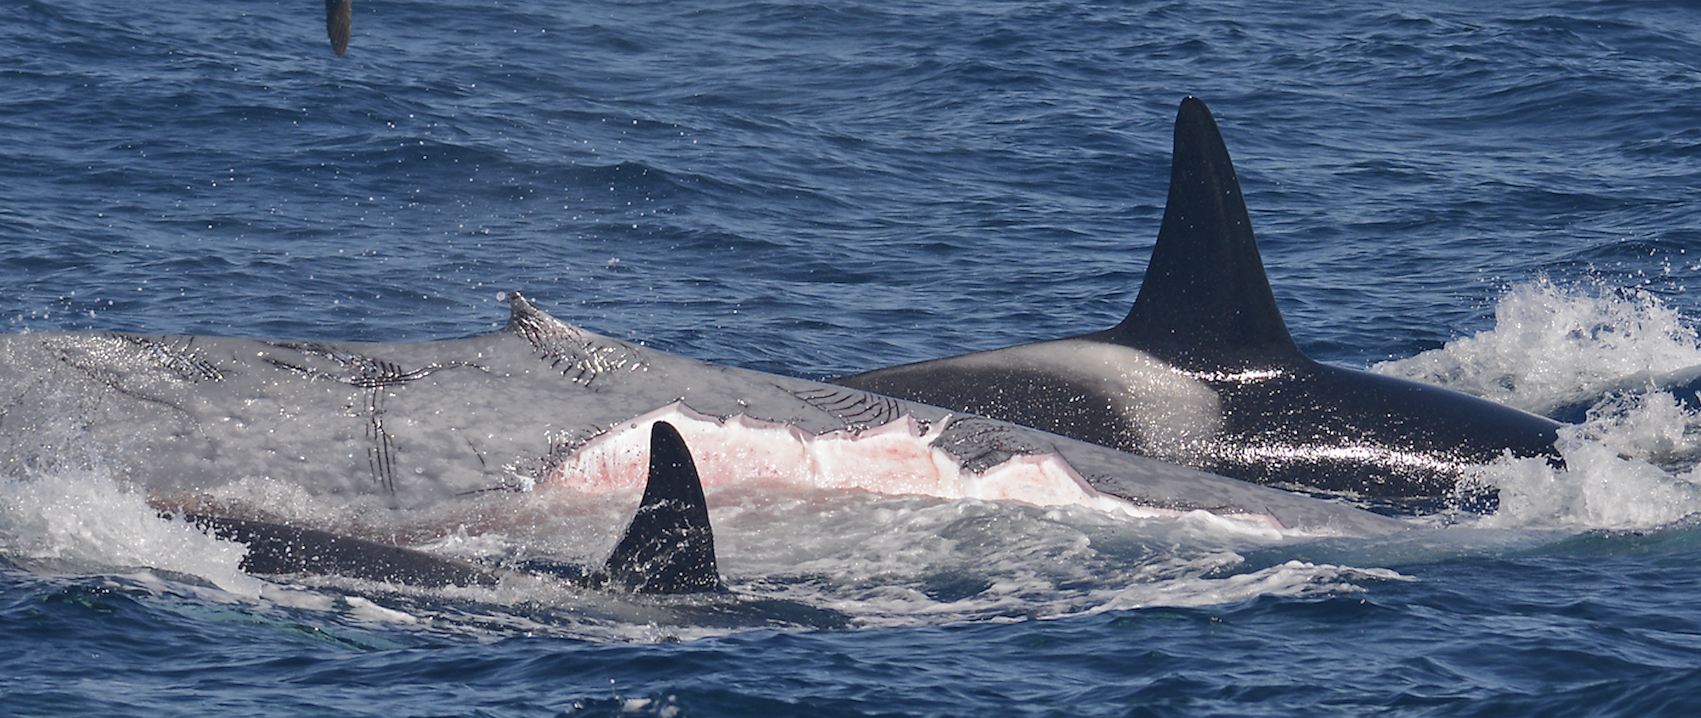 The orcas bit off chunks of skin and blubber from the blue whale.  (Photo: John Daw/Australian Wildlife Journeys)